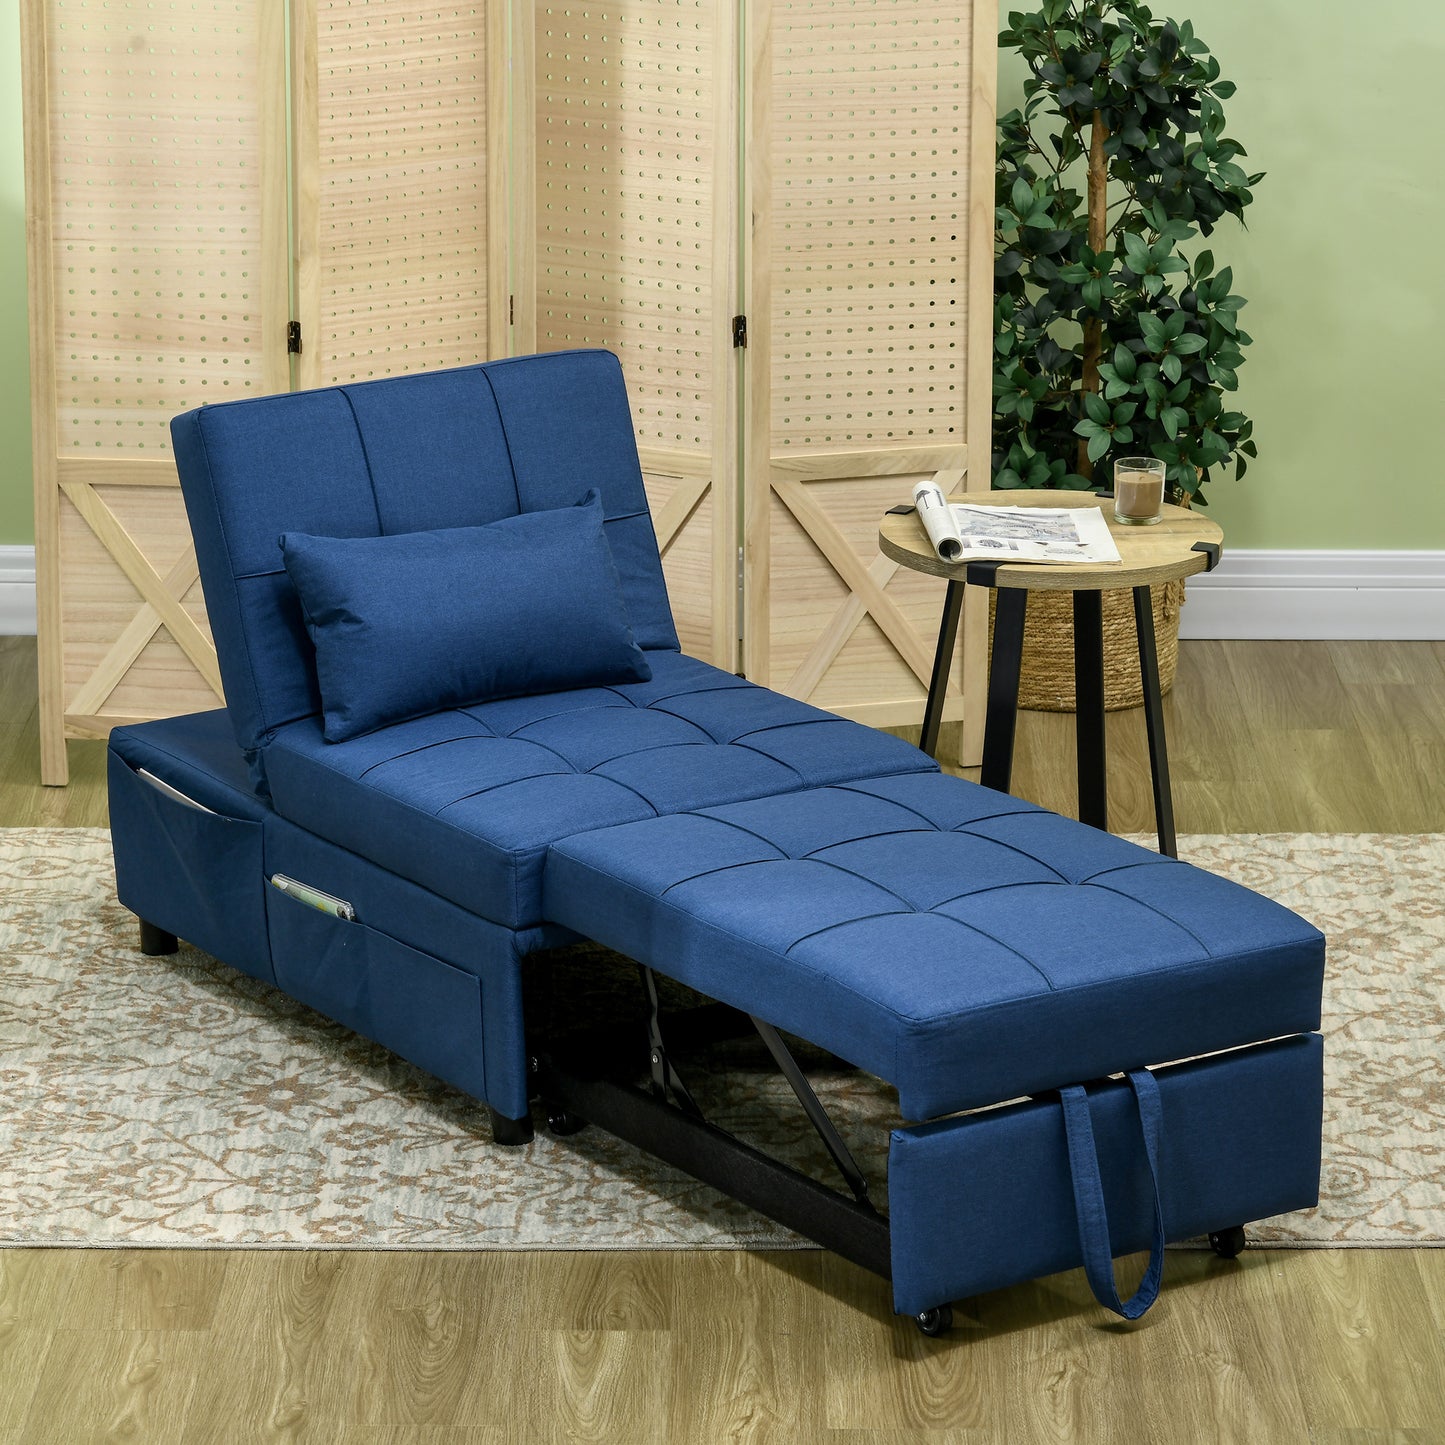 HOMCOM Convertible Chair Bed w/ Padding Seat, 3-in-1 Multi-Functional Sleeper Chair Bed, Recliner w/ Adjustable Backrest, Wheels and Pillow, Blue